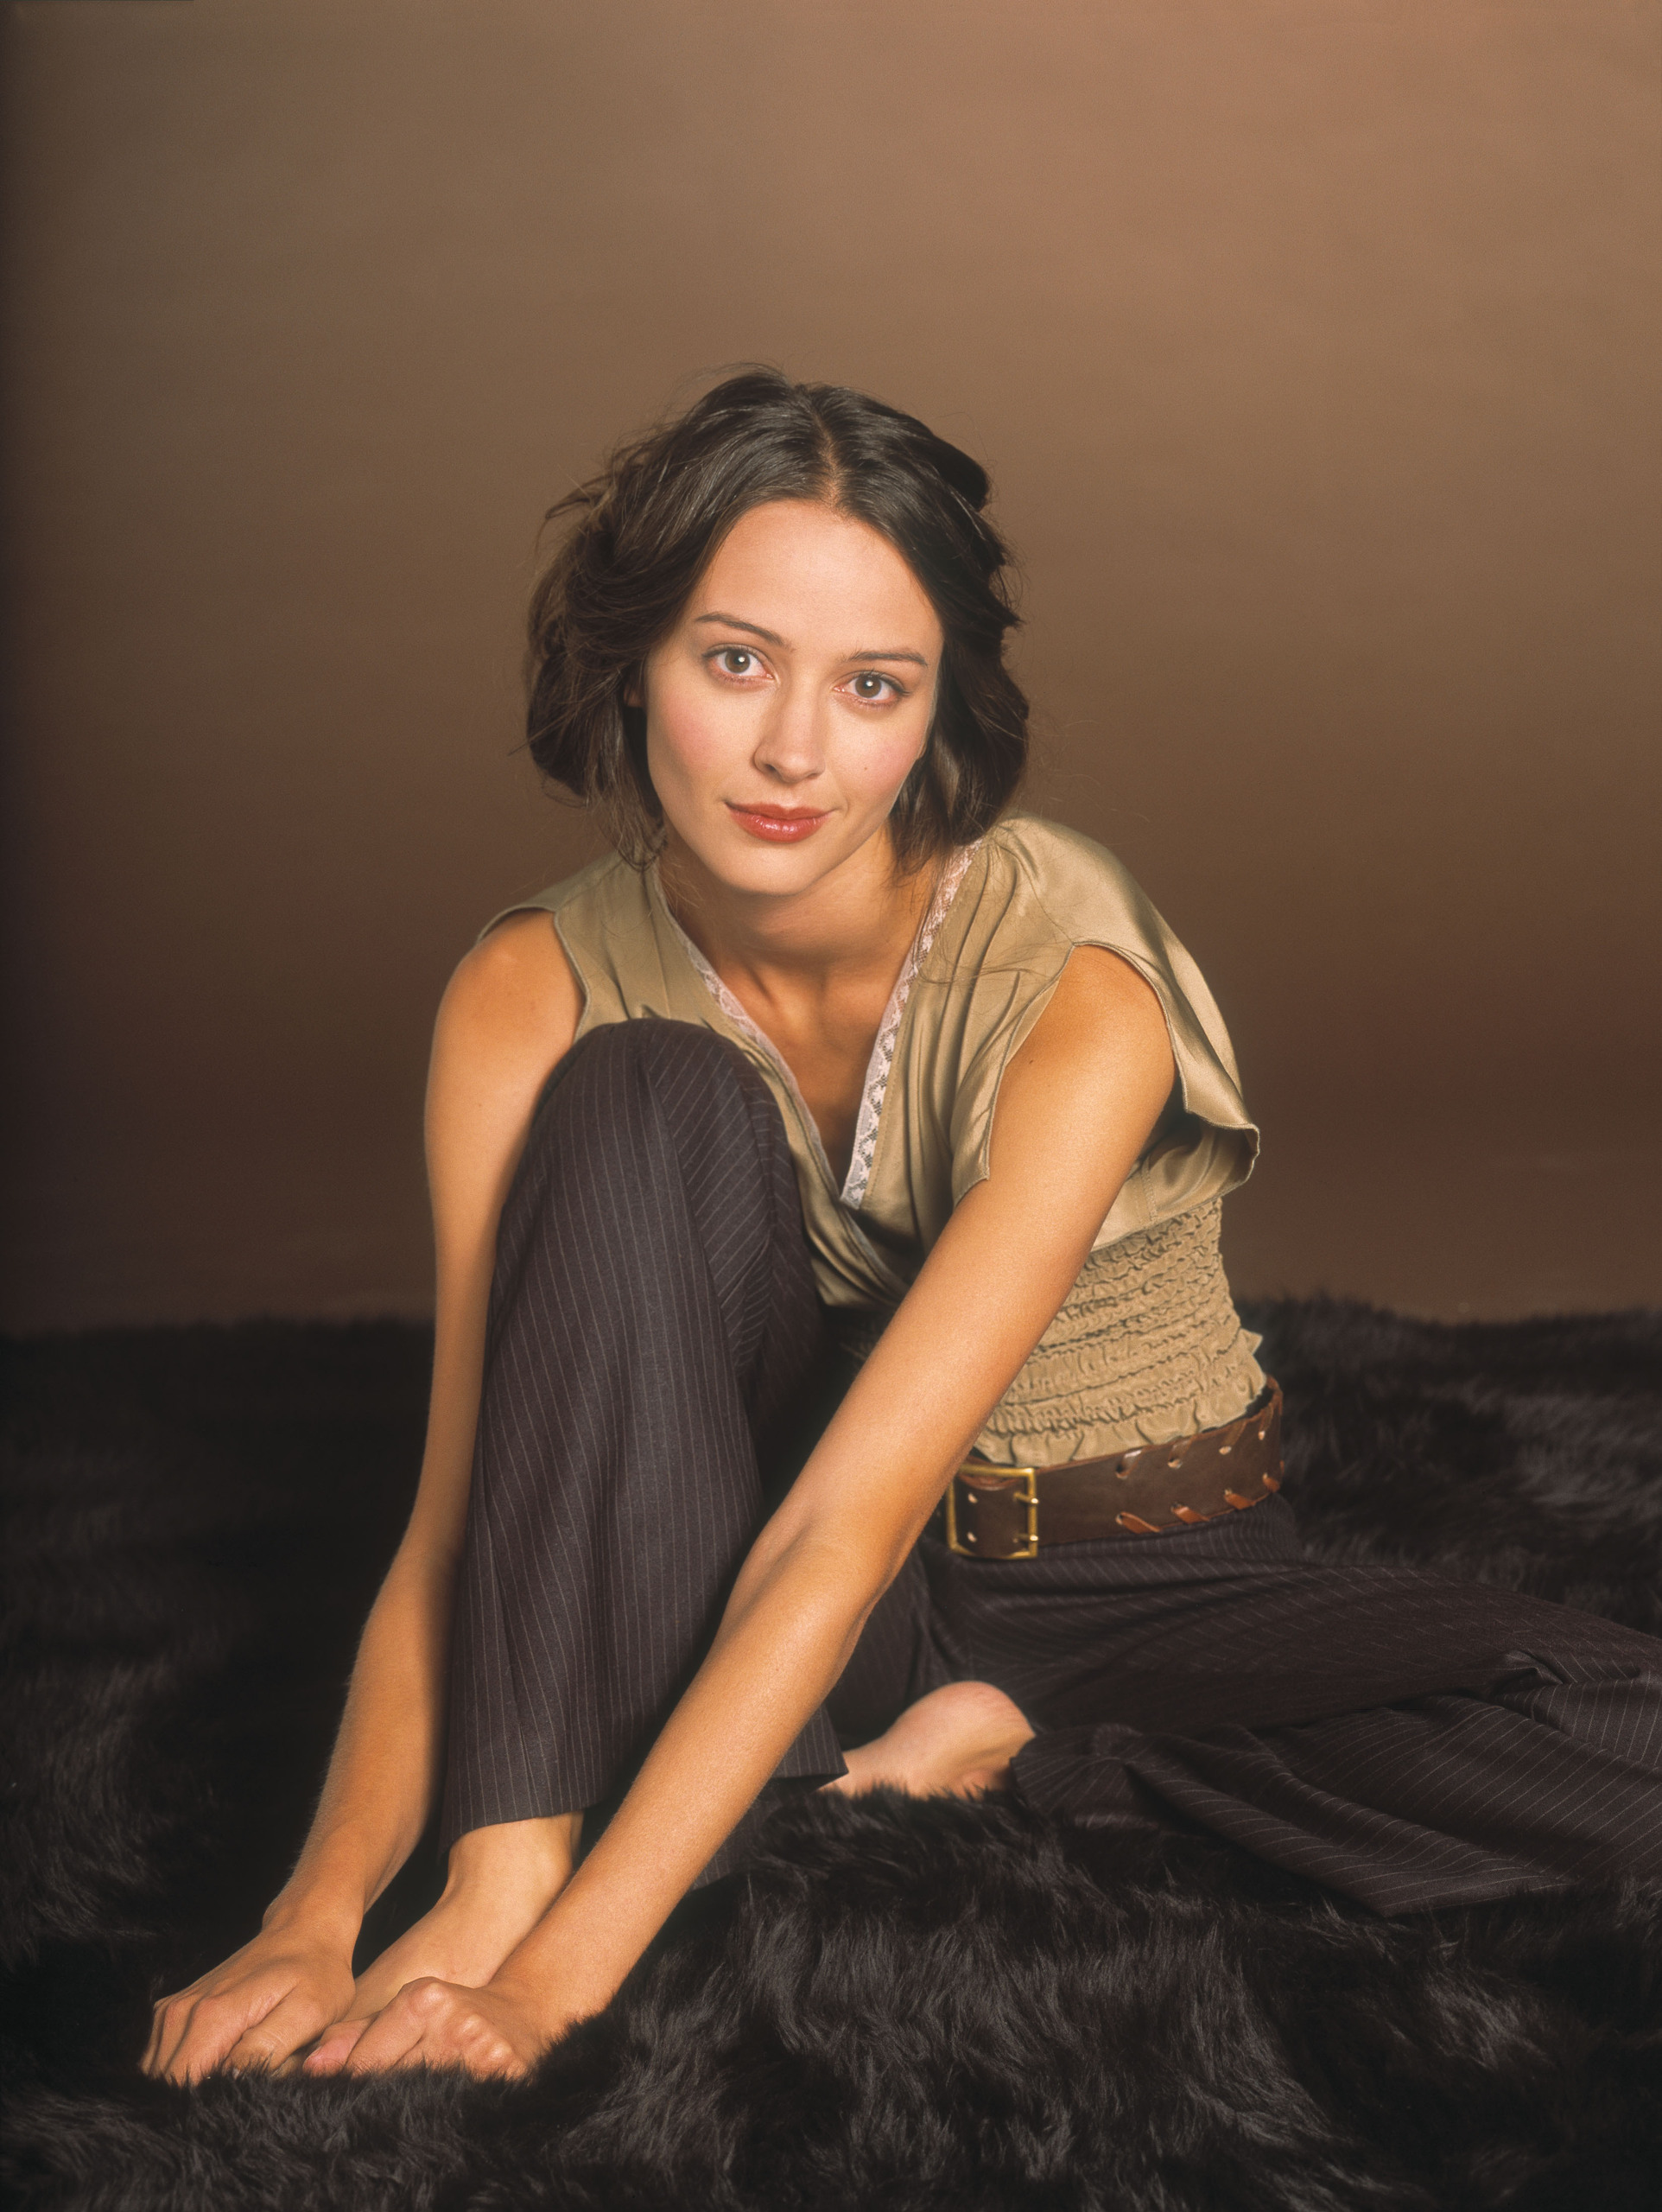 Hot TV Babe Of The Week.Amy Acker.